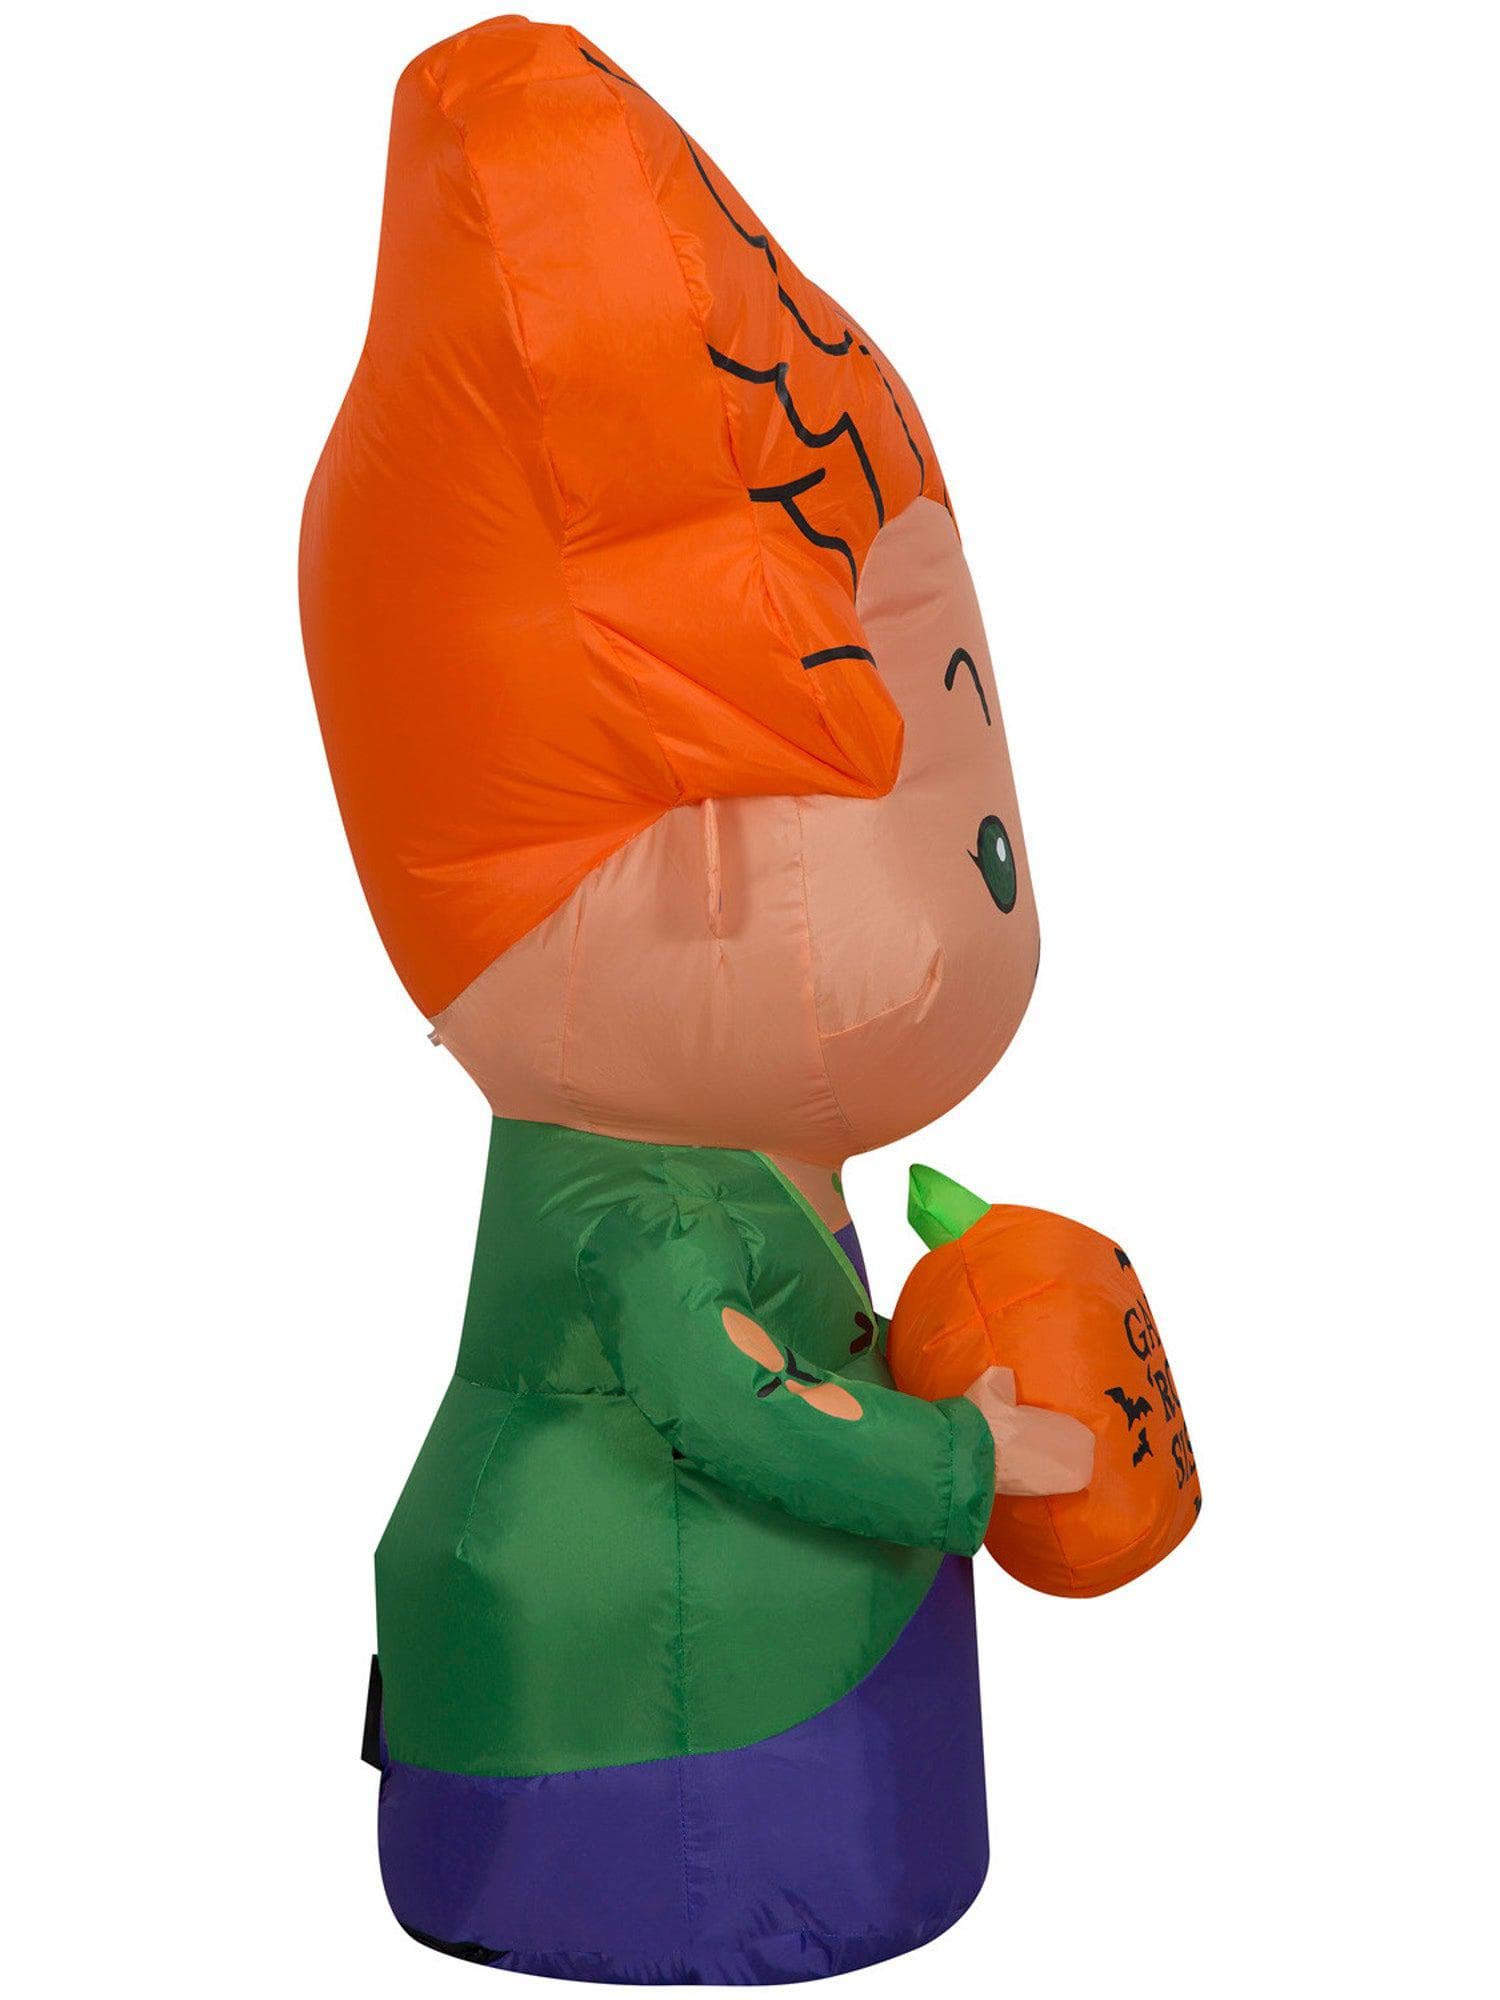 3.5 Foot Hocus Pocus Winifred Sanderson Light Up Halloween Inflatable Lawn Decor - costumes.com